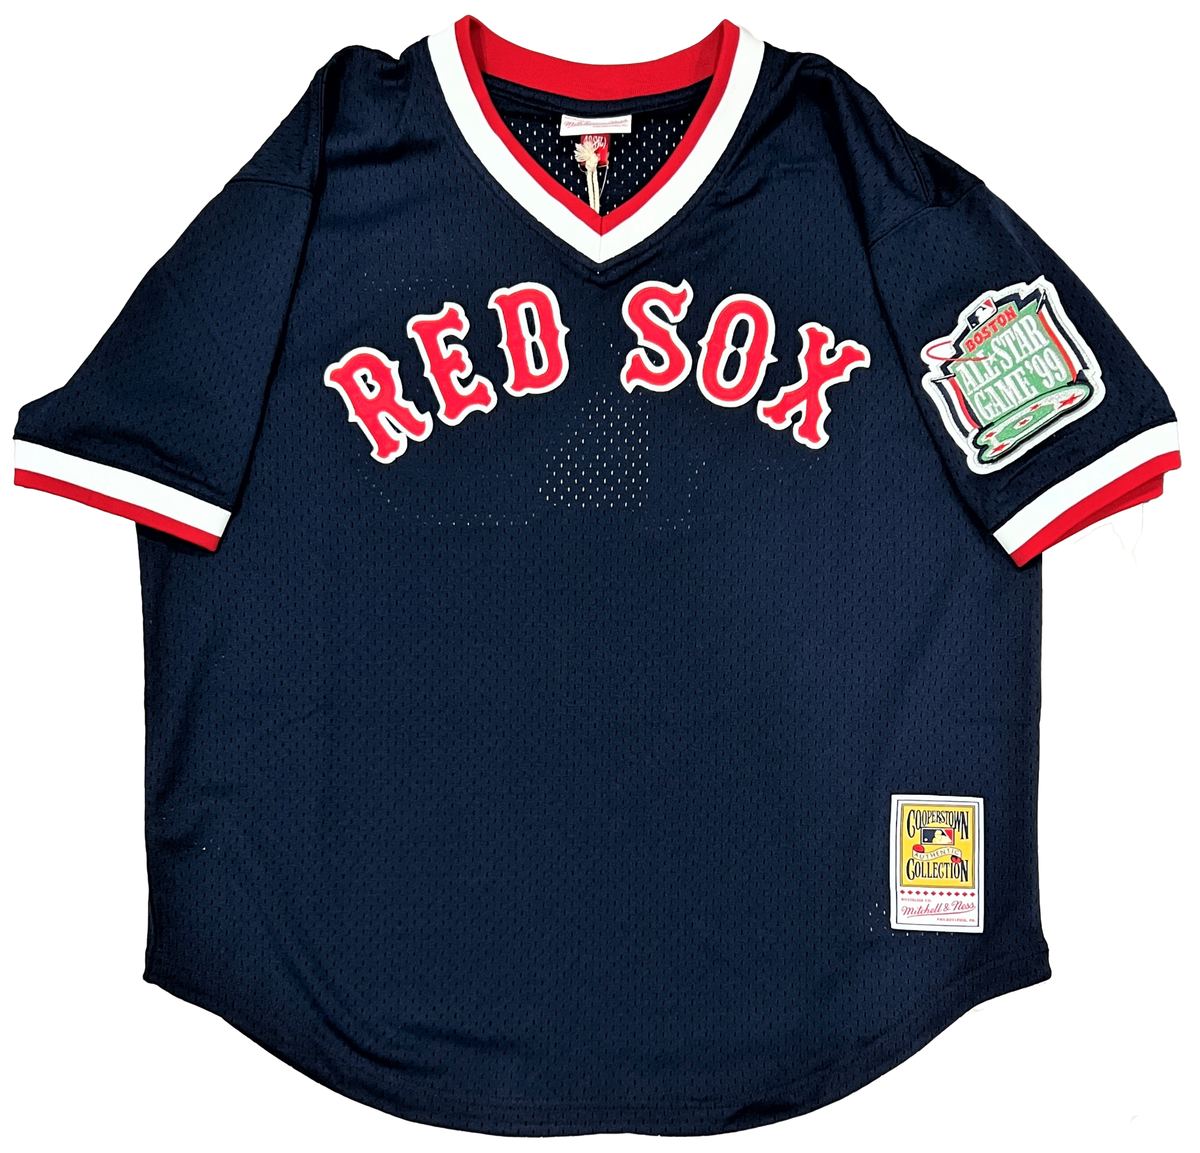 pedromartinezfoundation Authentic and Autographed Pedro Martinez Red Sox Mitchell & Ness Jersey S